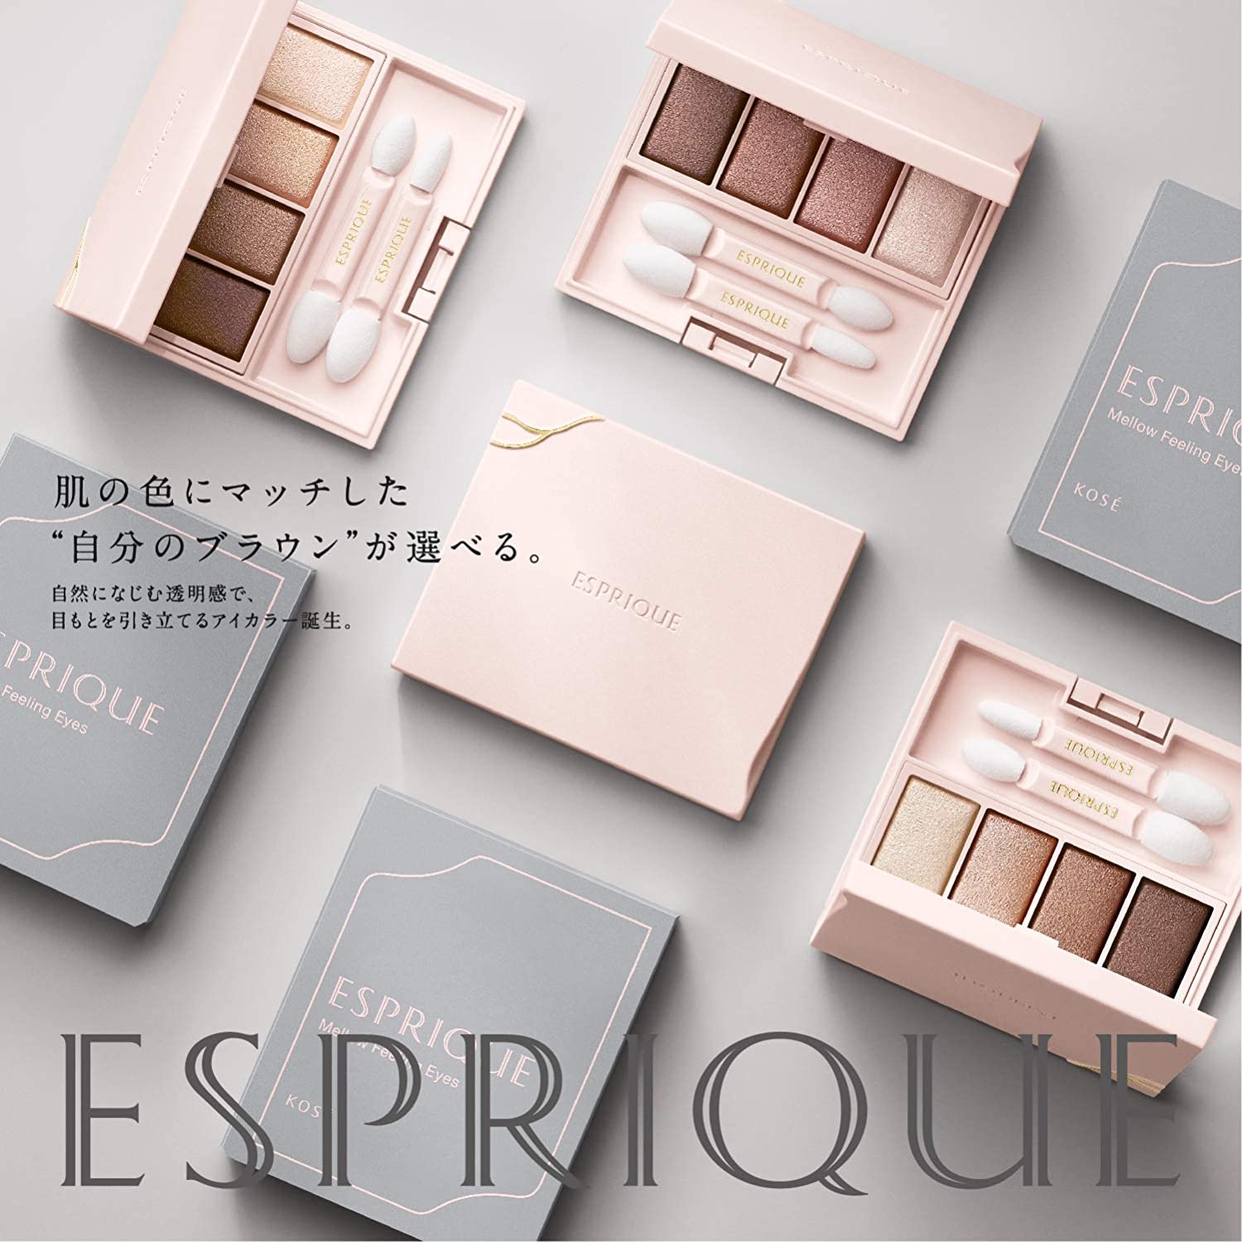 ESPRIQUE(エスプリーク) メロウ フィーリング アイズの商品画像サムネ4 